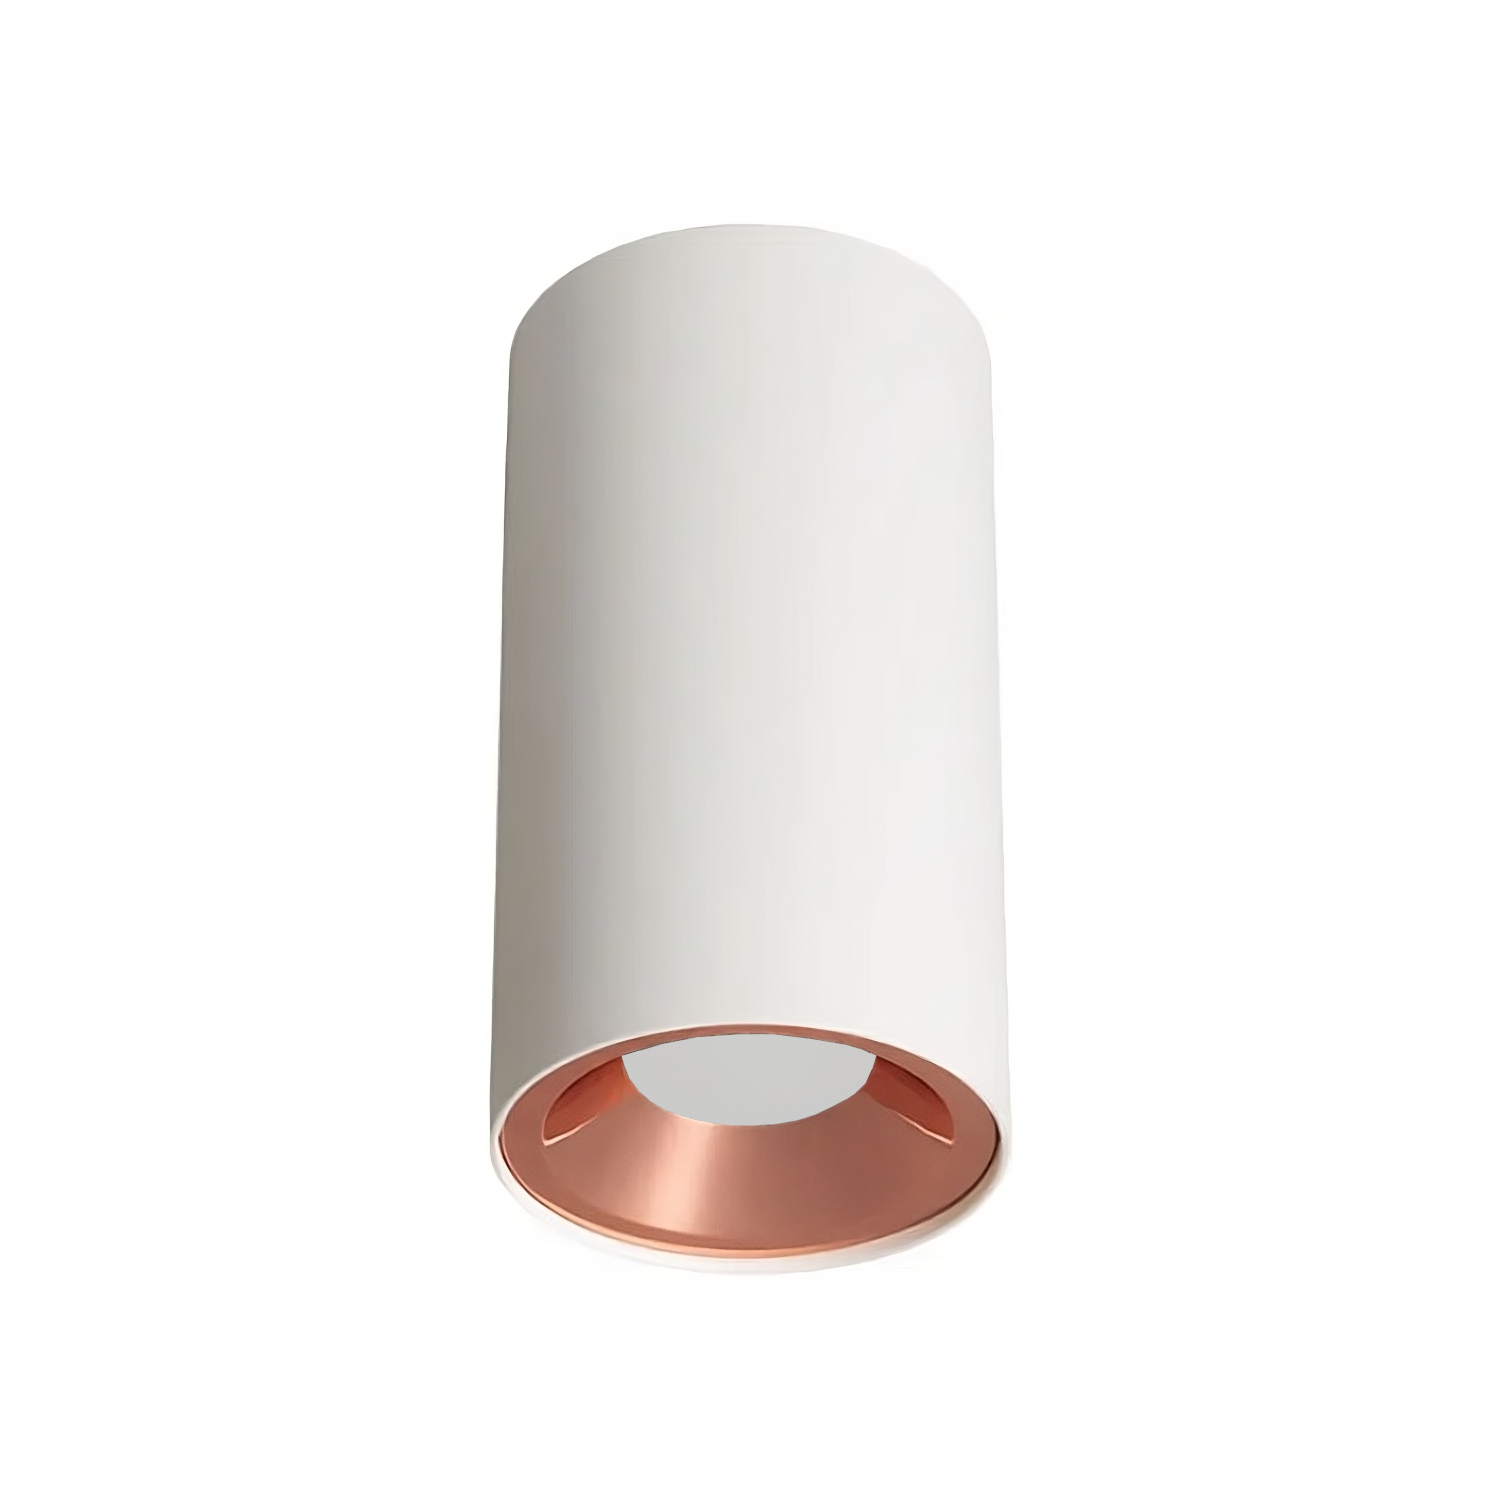 Product image of Zela Surface Mount with Opal Lens White with Copper Inner